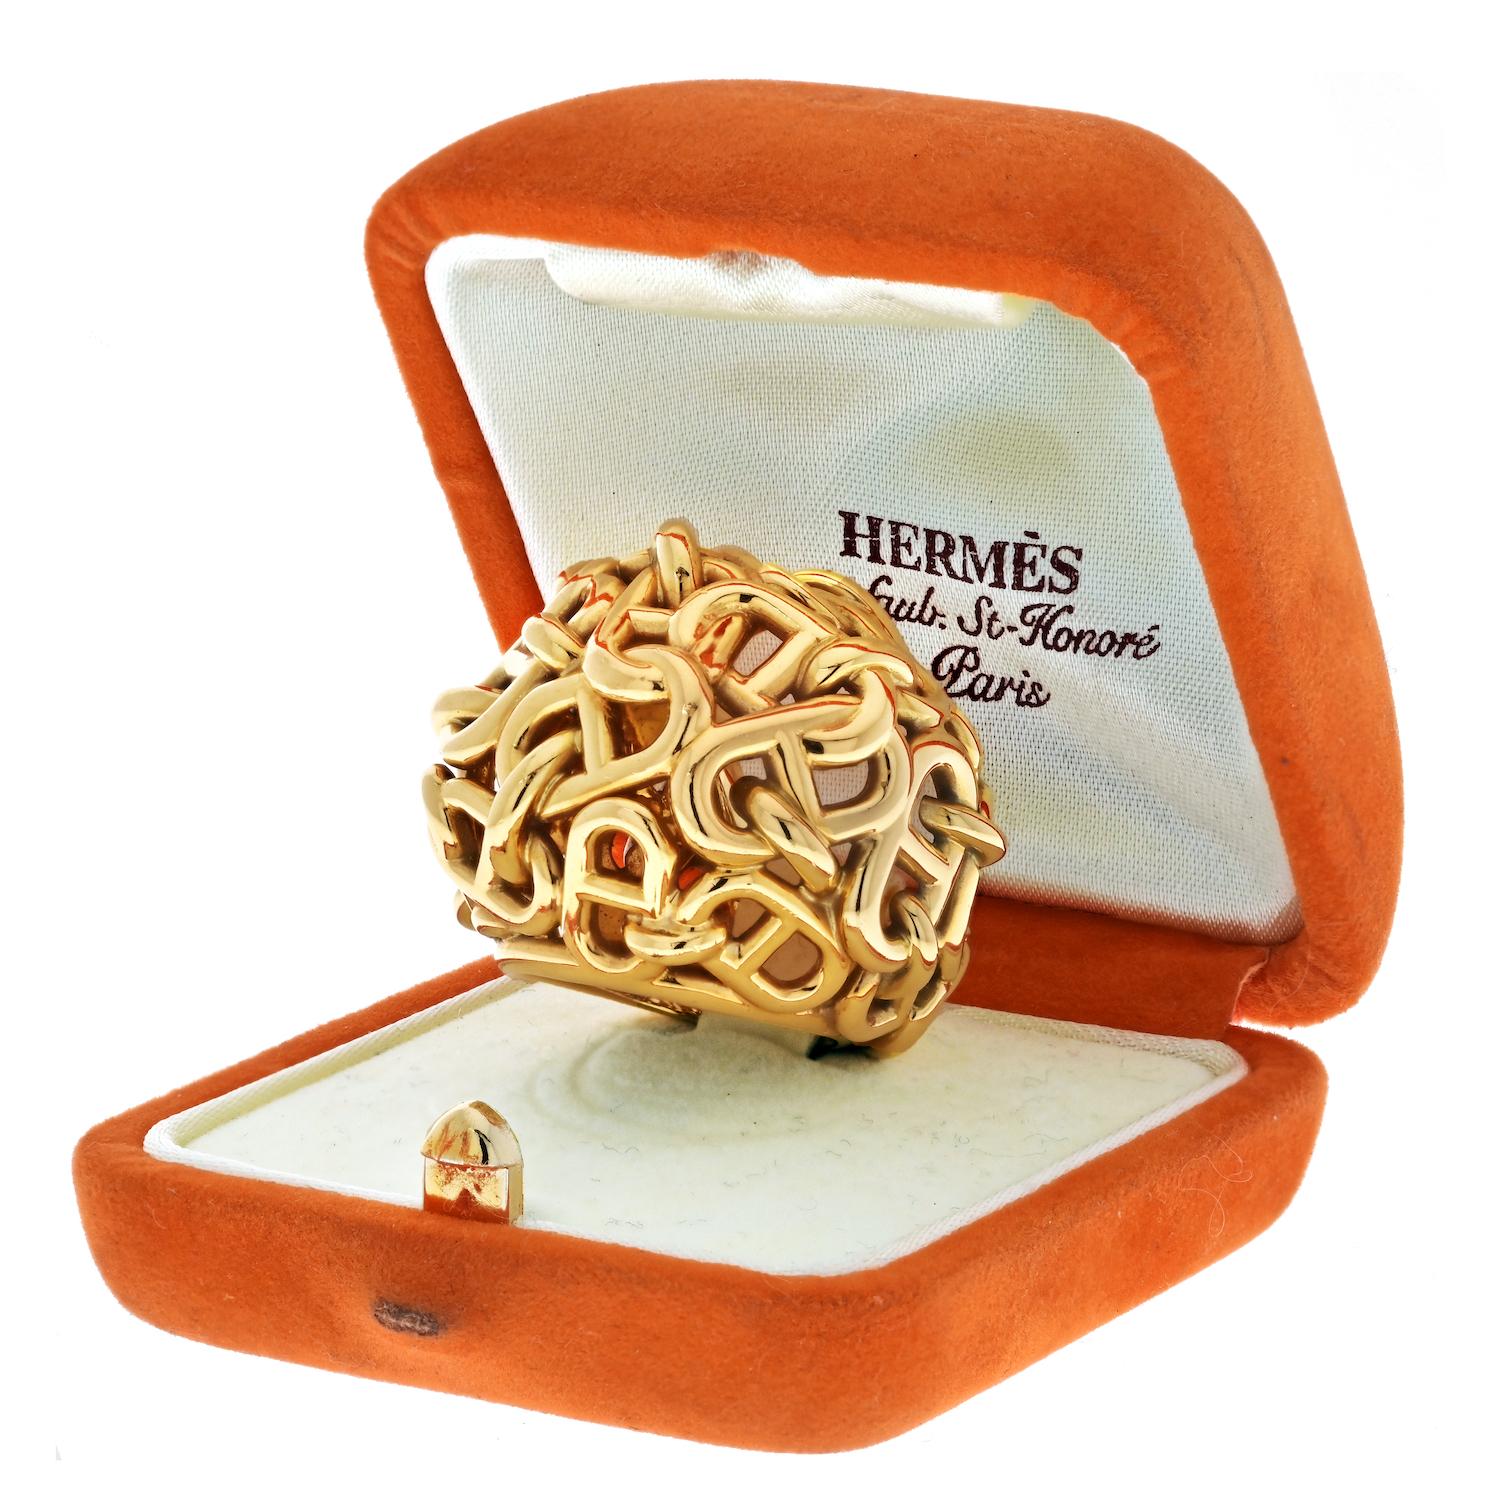 Hermes 18K Gelbgold Chaîne d'Ancre Dome Cocktail Ring im Angebot 1